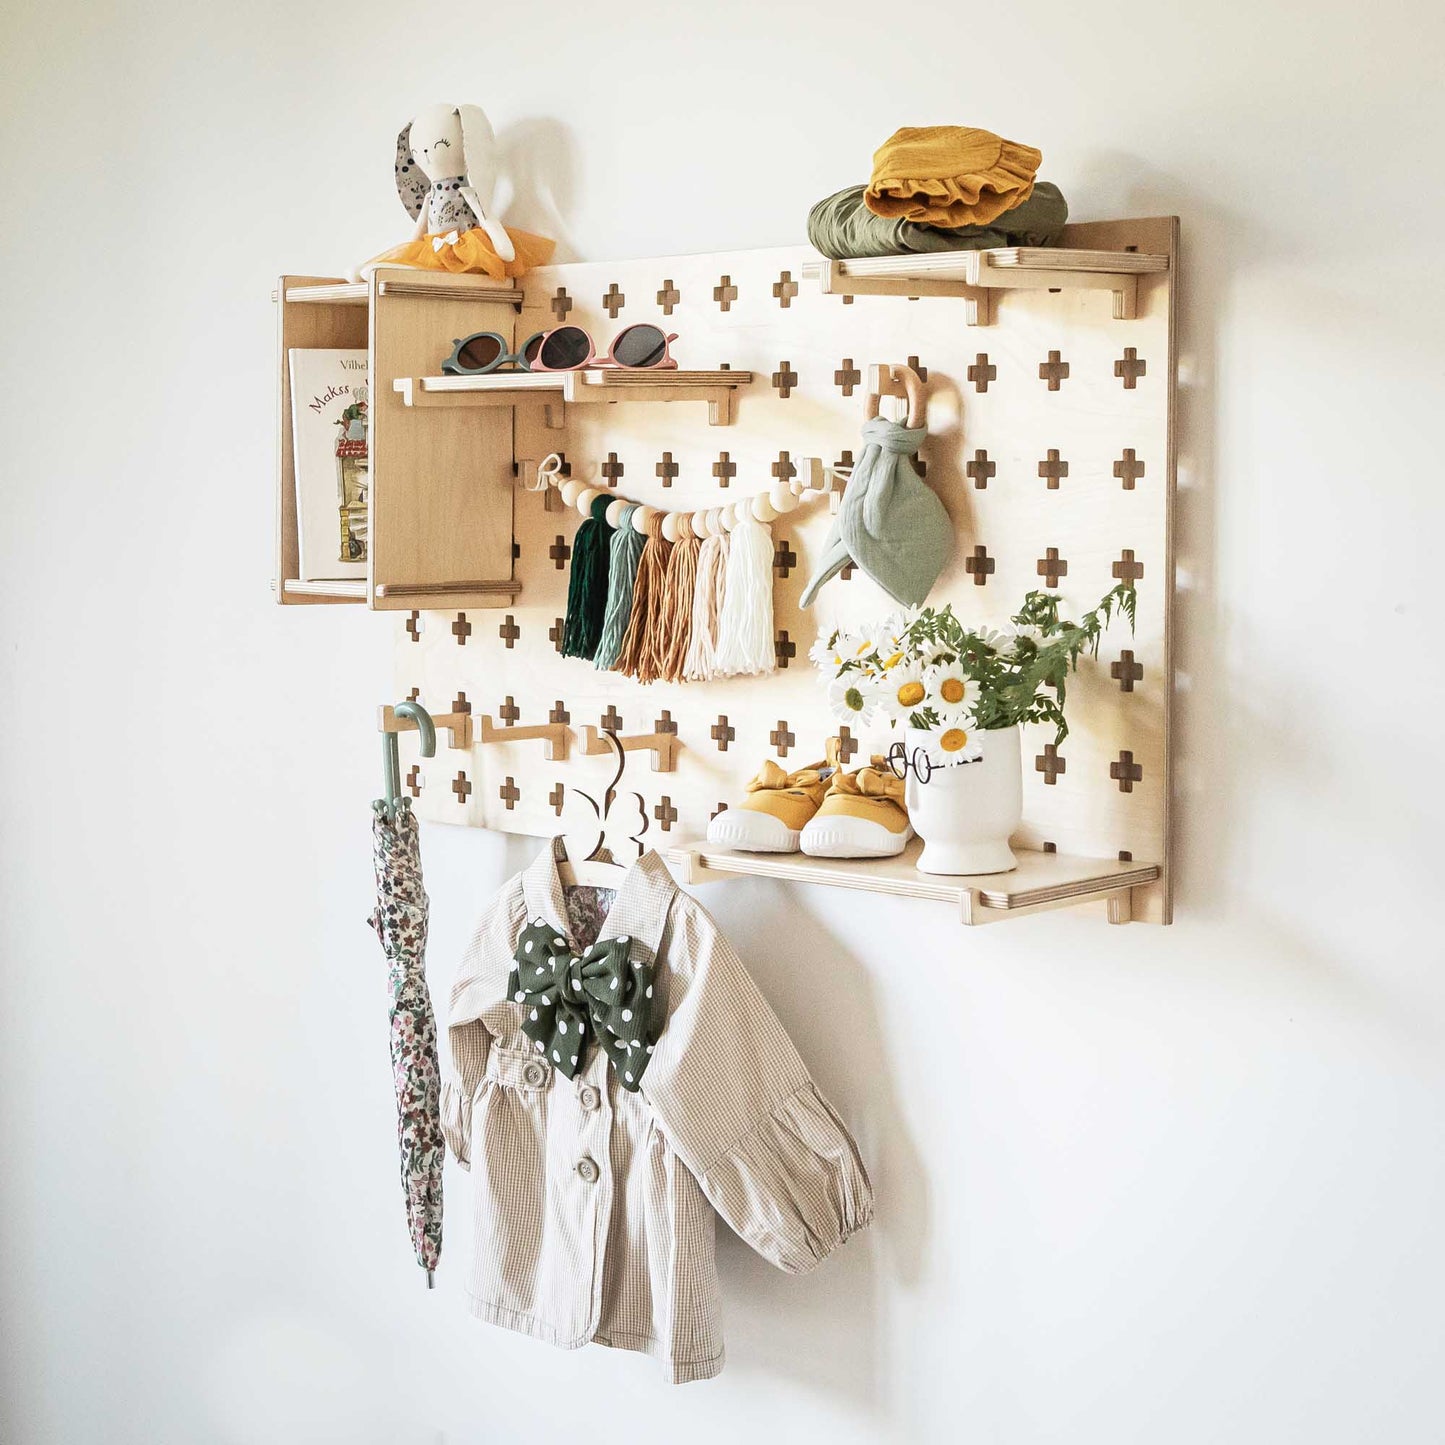 A Sweet HOME from wood Floating Shelves Pegboard with clothes hanging on its open storage shelves.